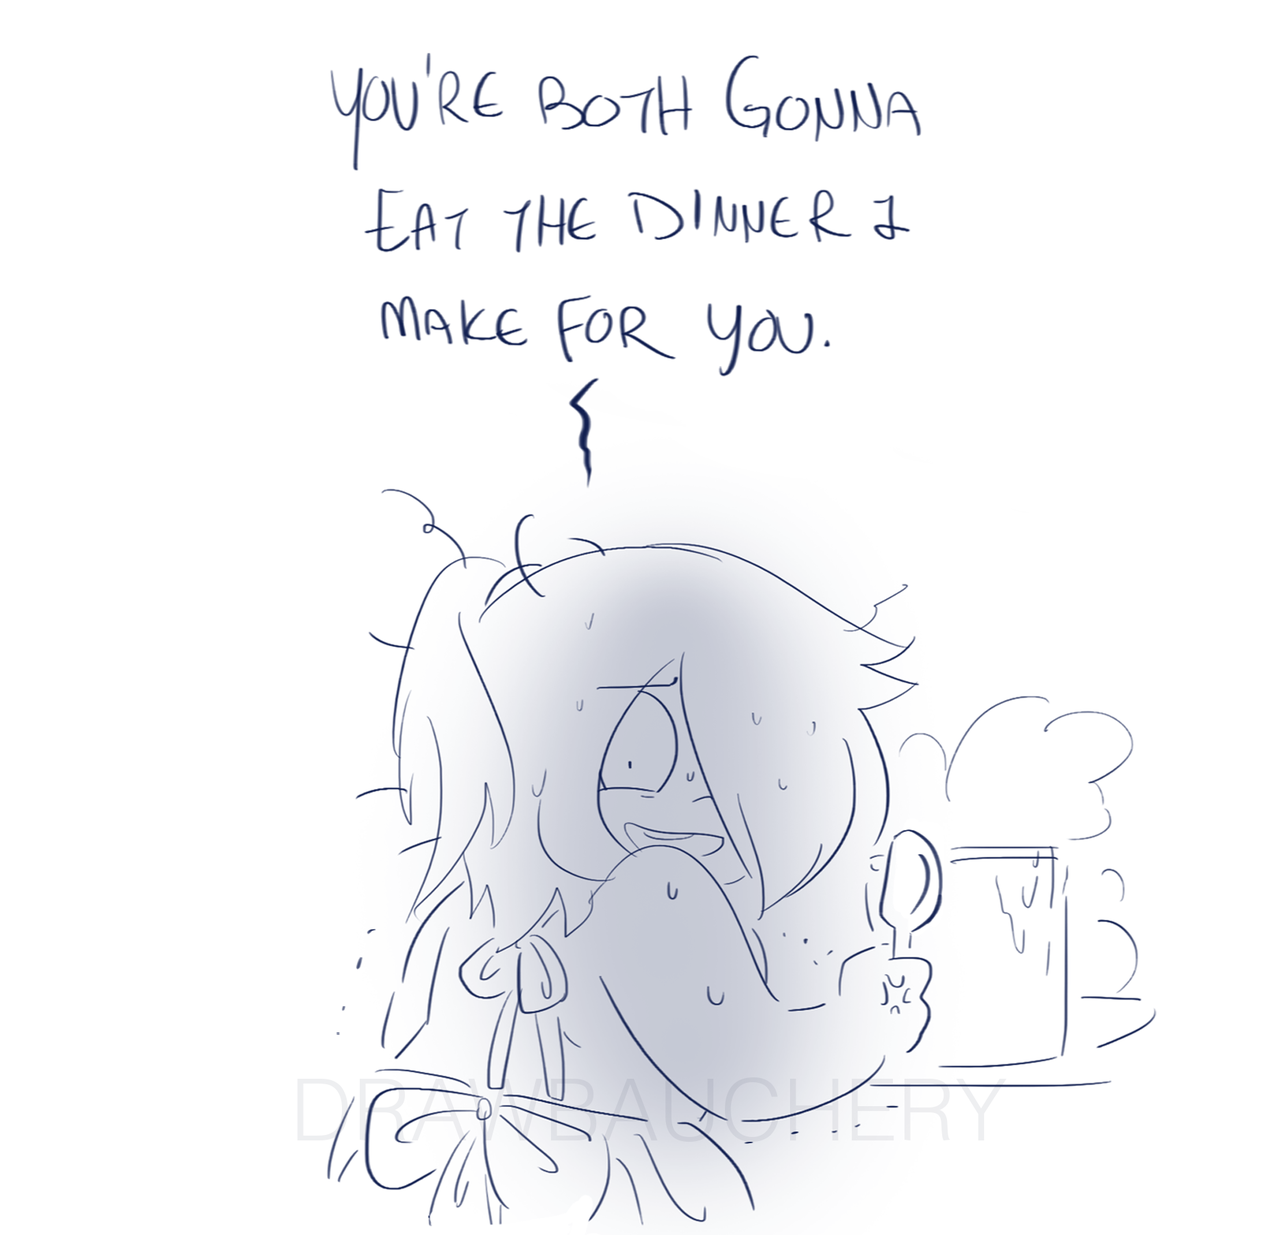 amethyst doesn’t have any patience for your double entendres